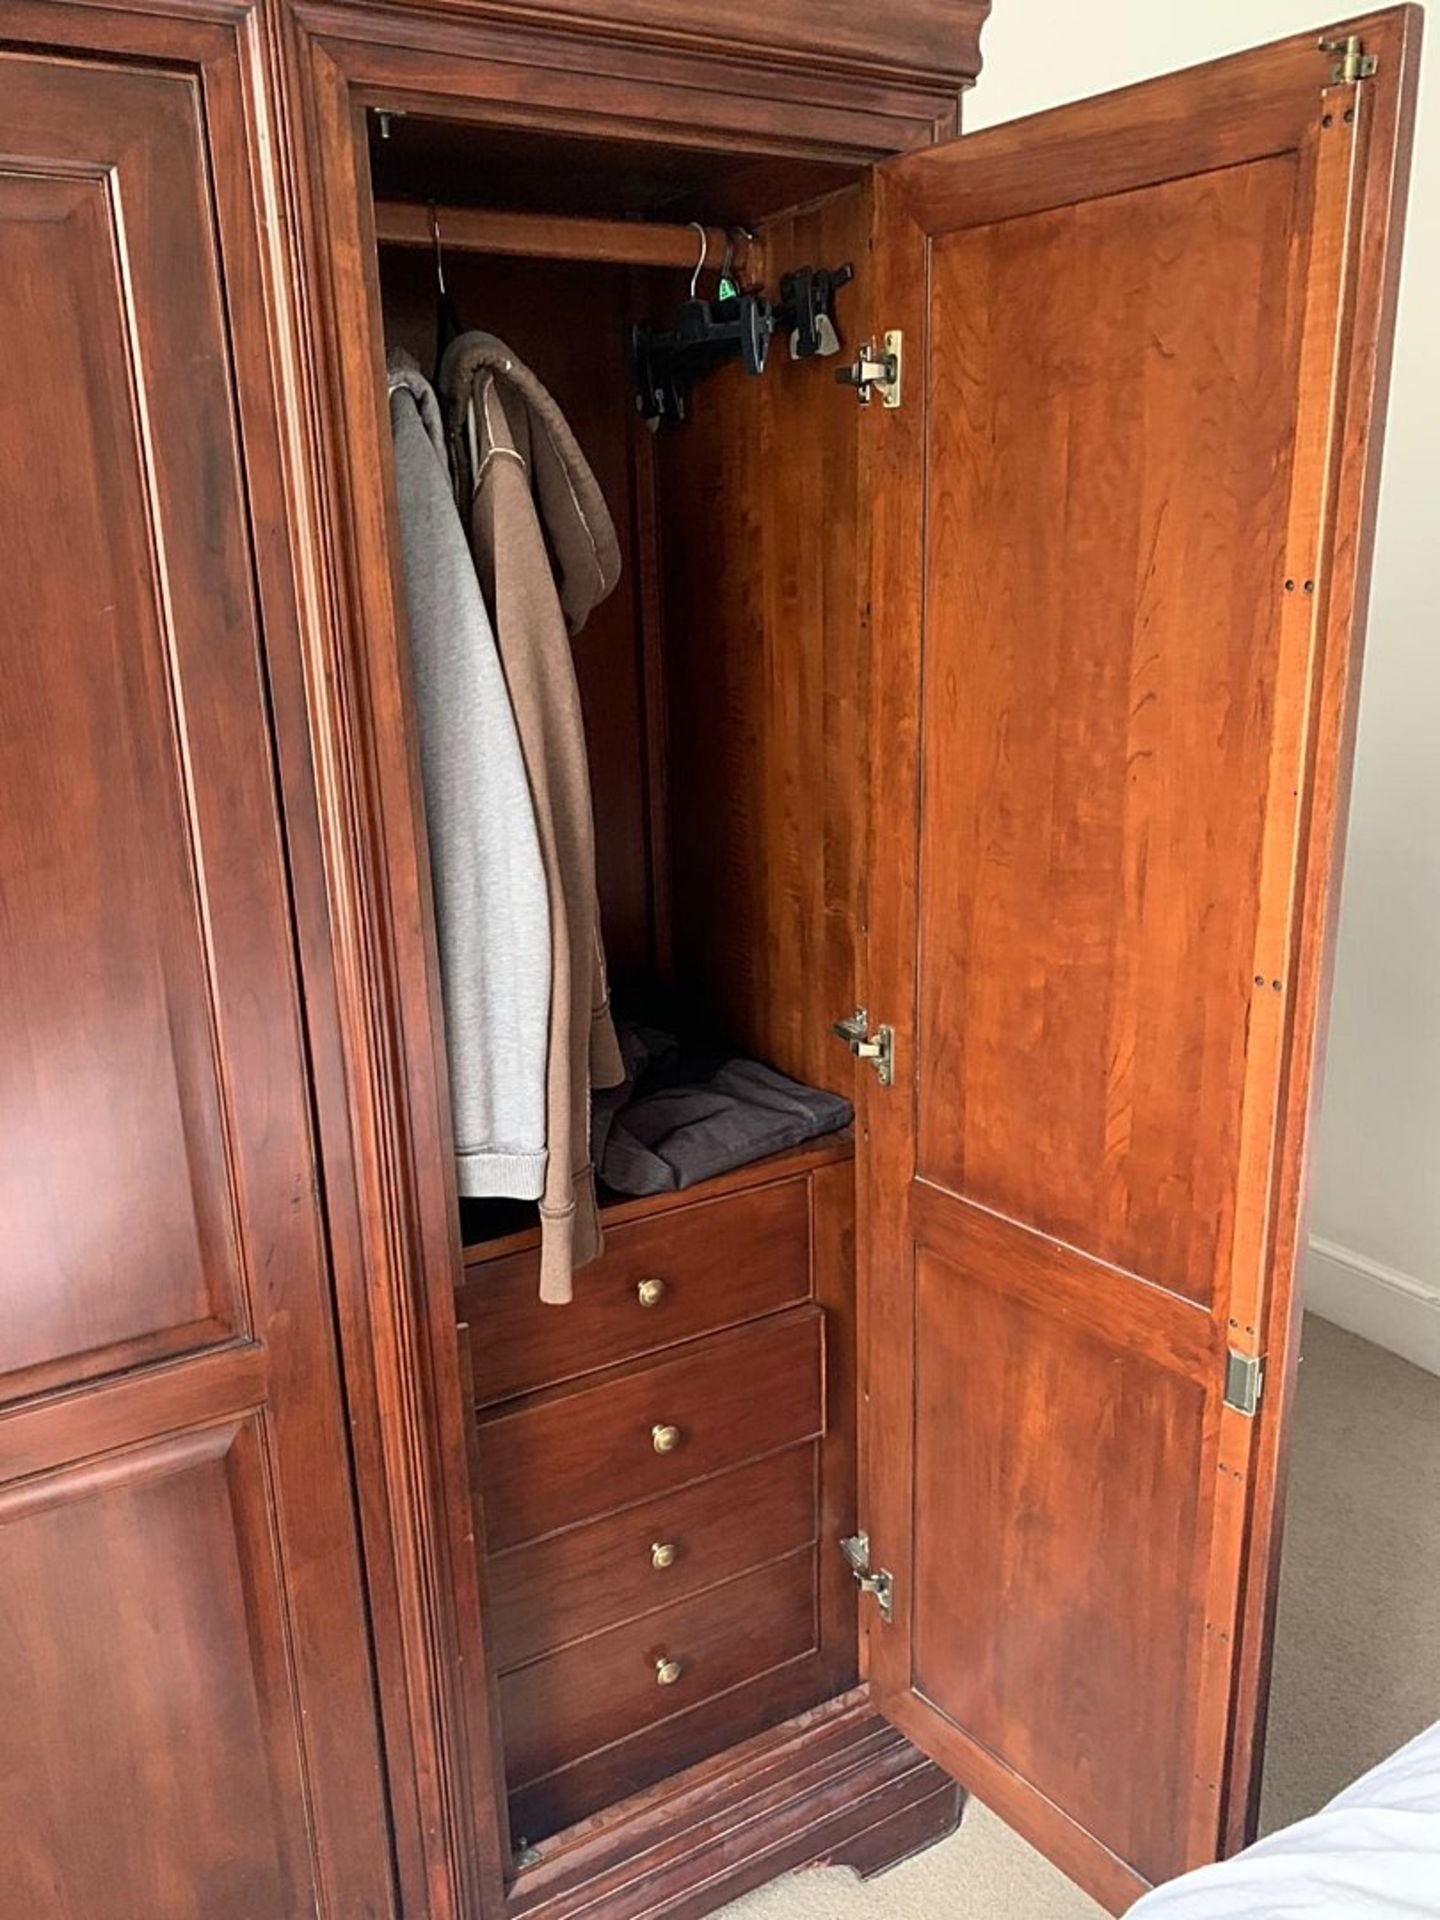 1 x 3-Door Solid Wood Wardrobe - Dimensions: H196 x D66 x W172cm - Ref: MC586 - Pre-owned - - Image 3 of 3